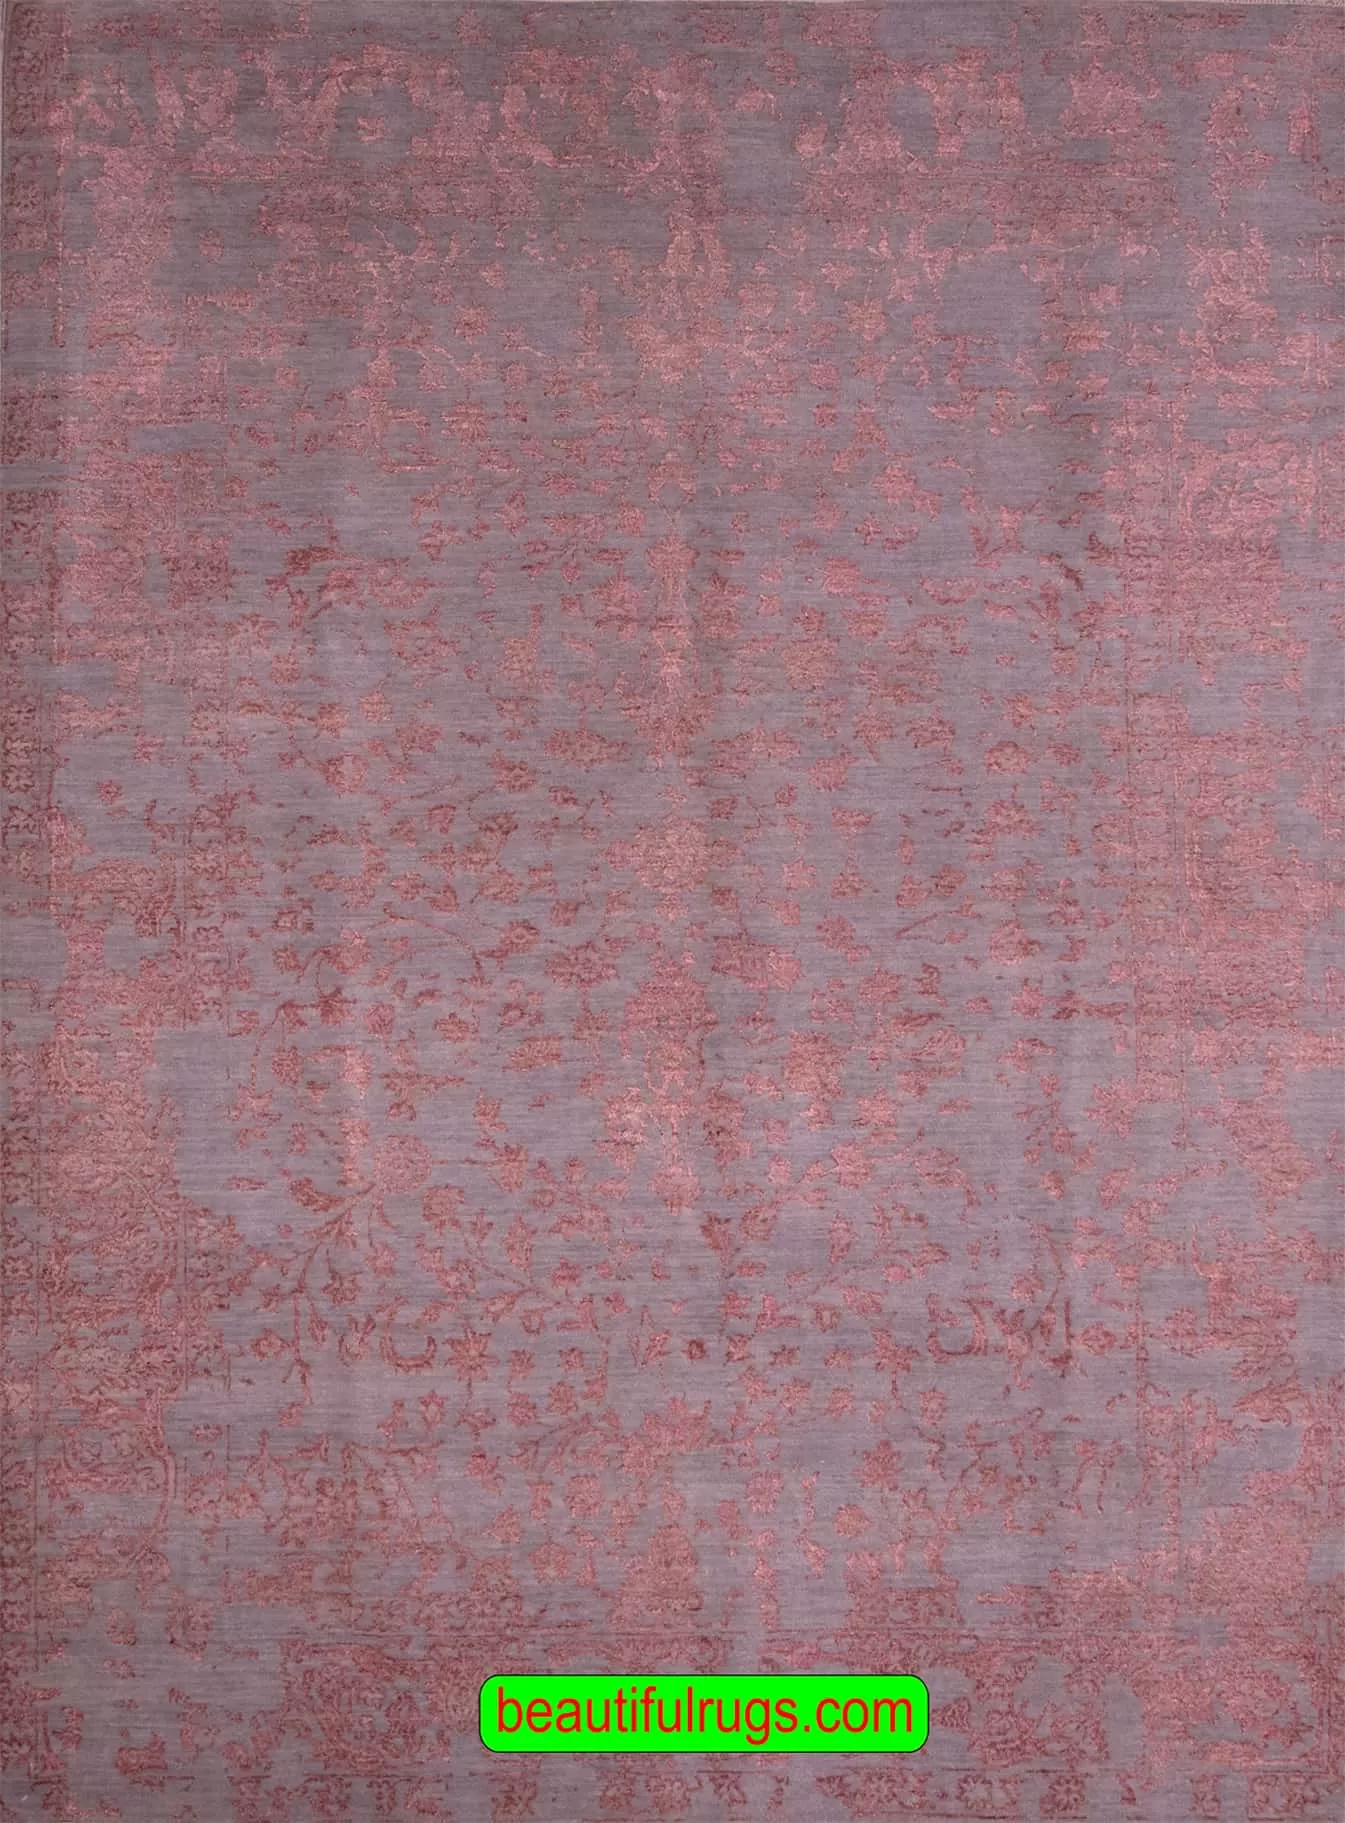 Modern Rug for Living Room with Gray and Pink colors. Size 6.3x9